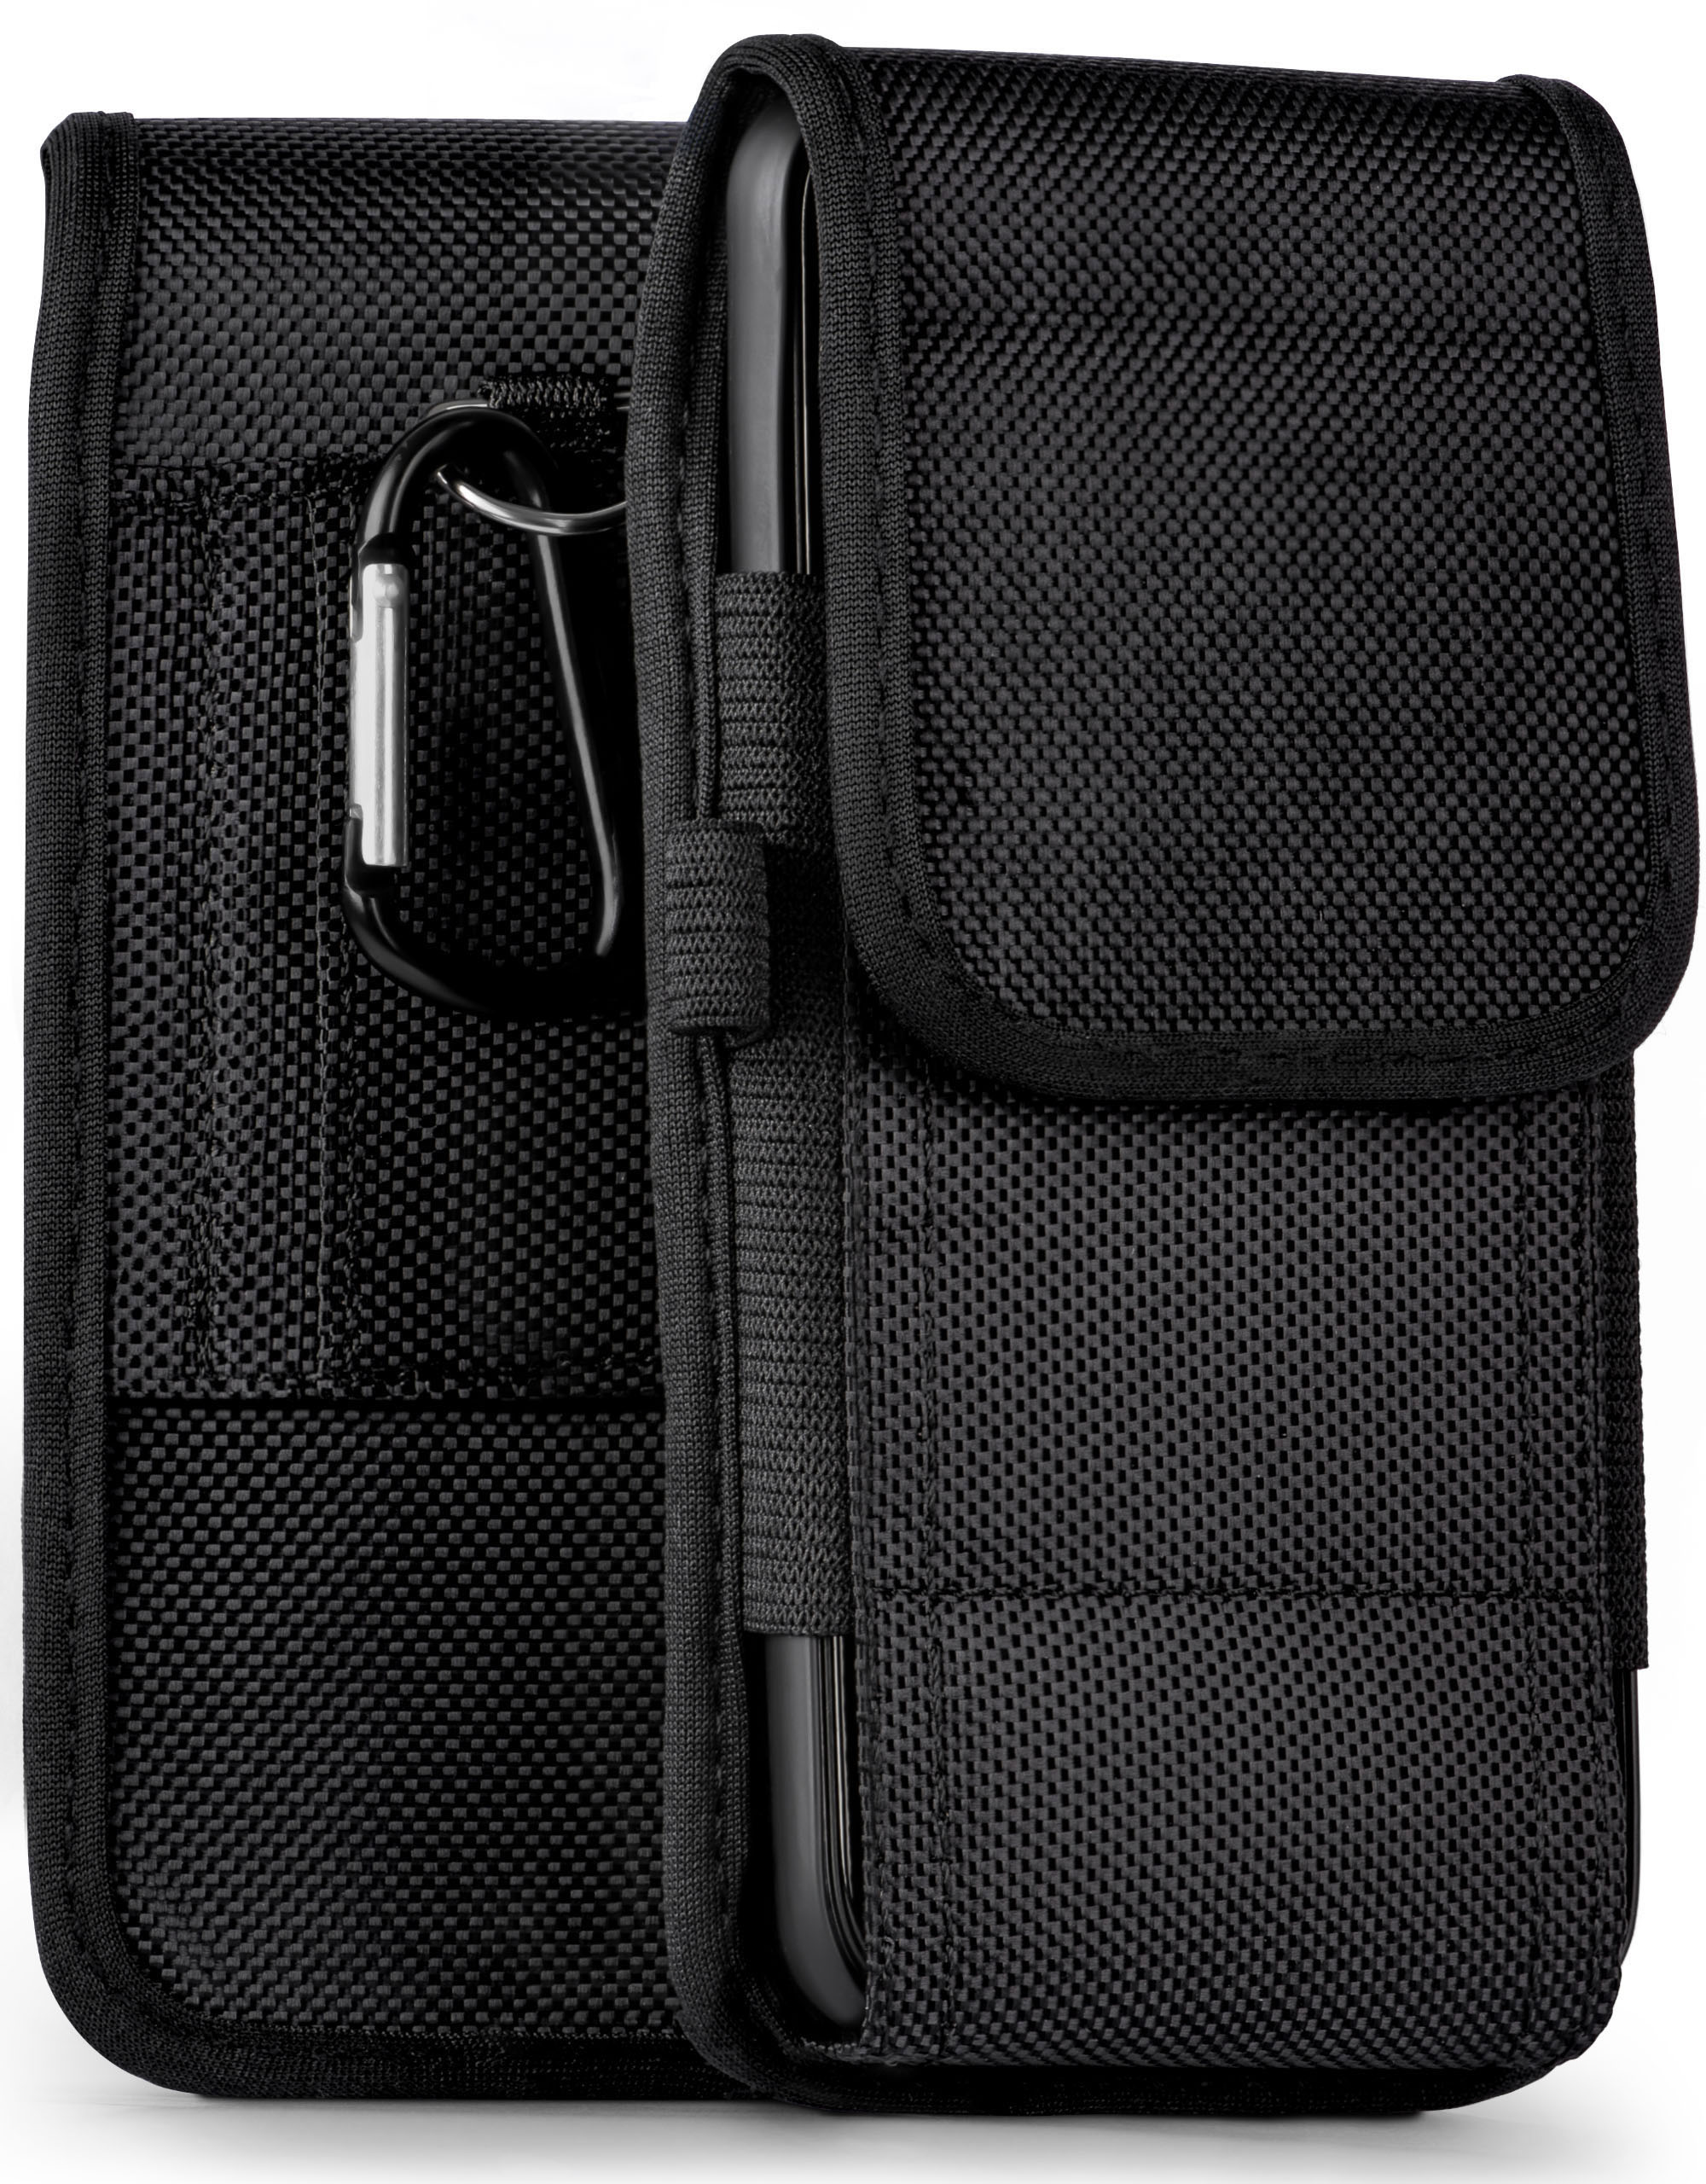 MOEX Agility 2.1, Case, Trail Nokia, Holster,